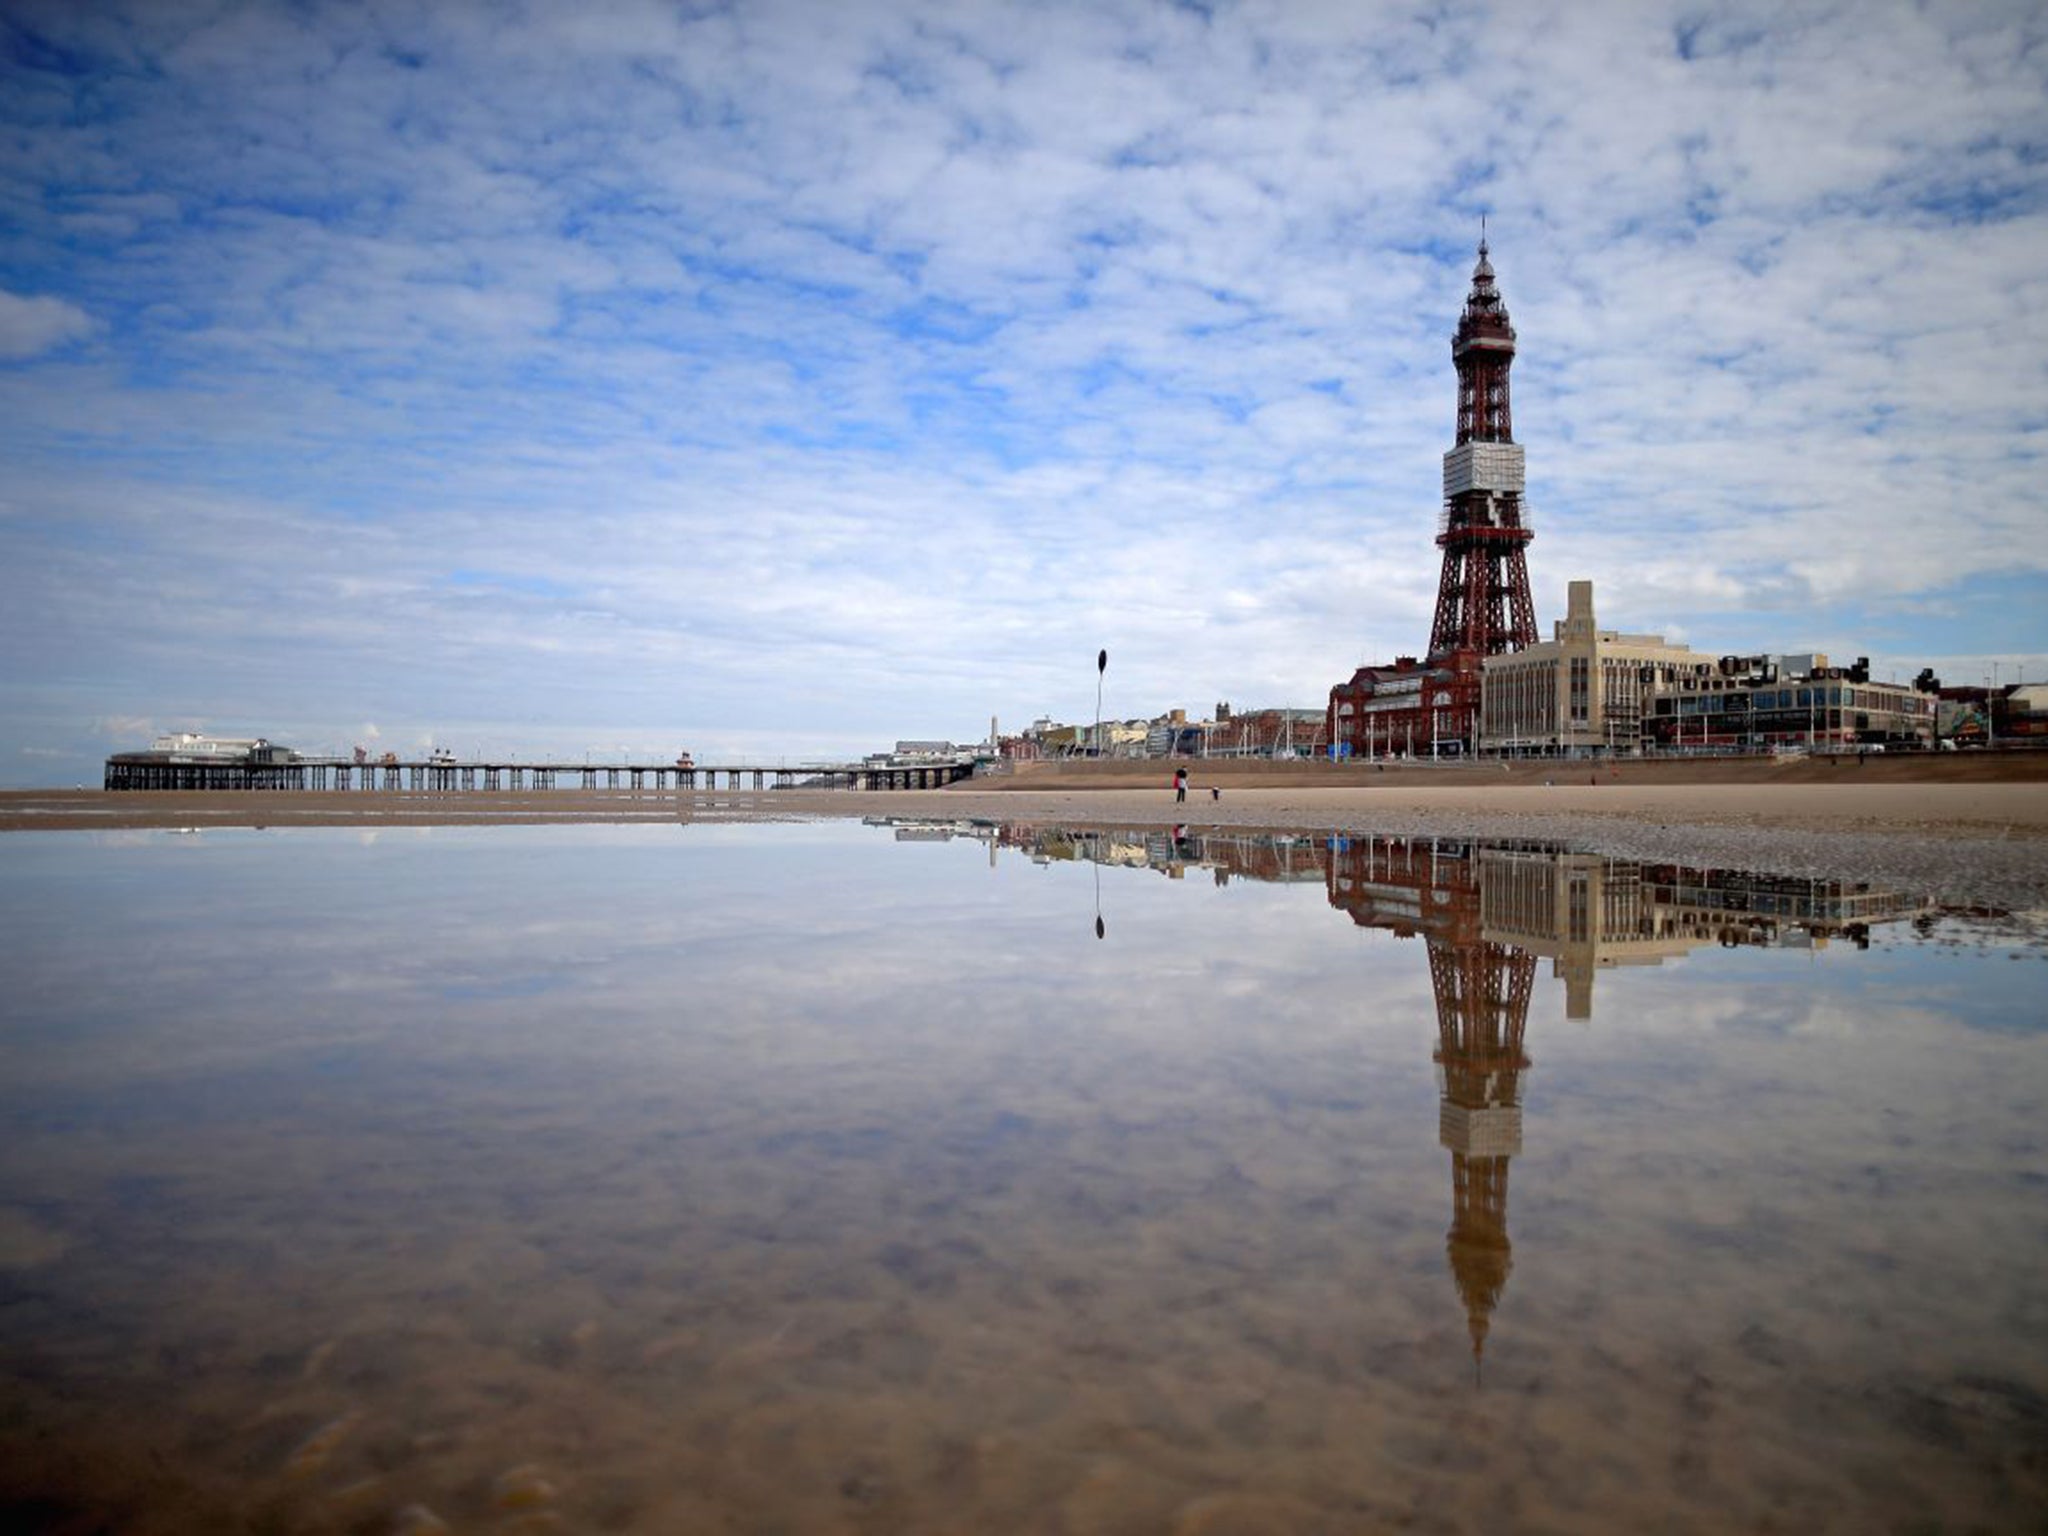 The hotel is a stone's throw from Blackpool Tower